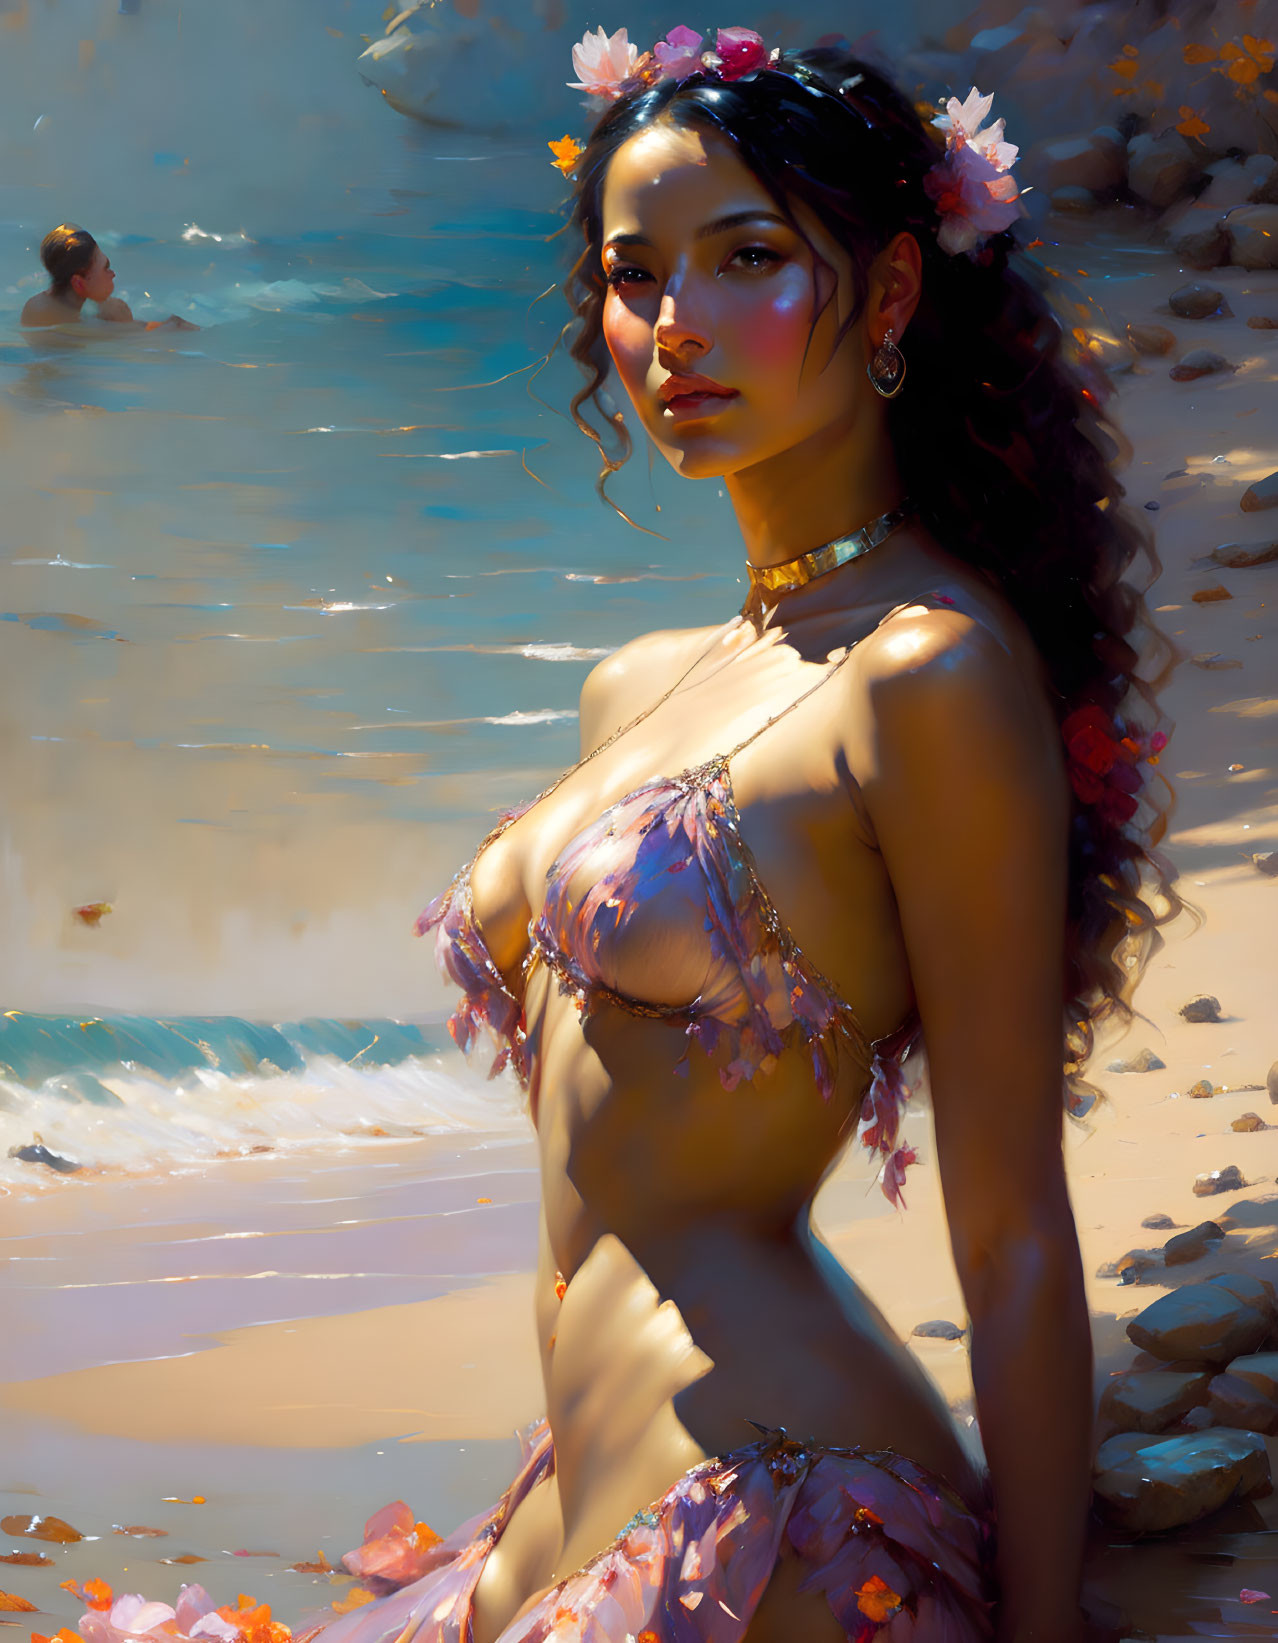 Digital painting of woman with flowers on beach with sparkling water